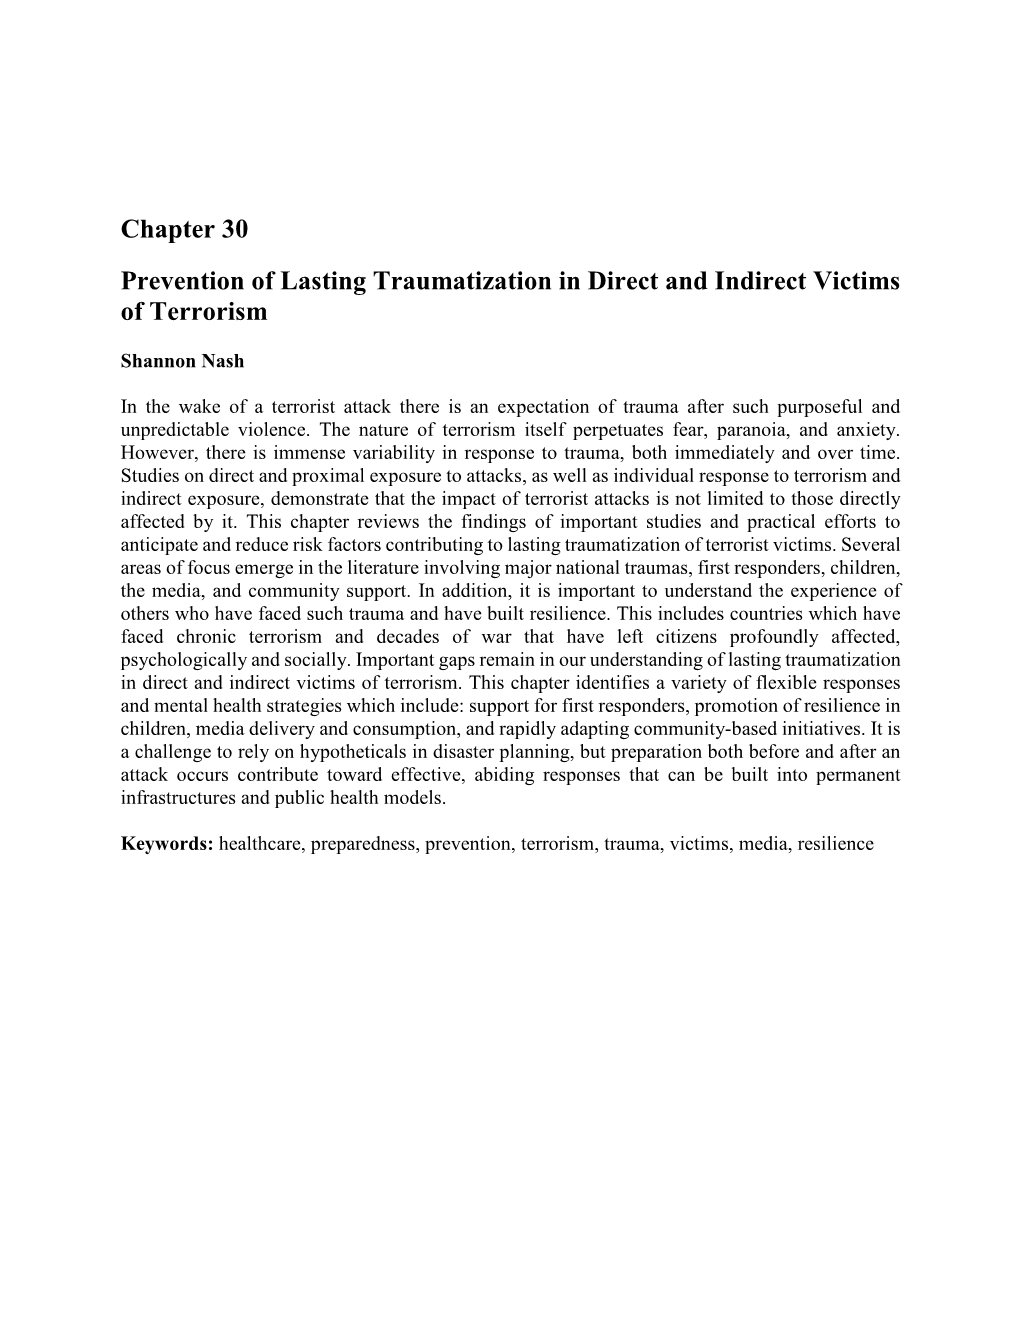 Chapter 30 Prevention of Lasting Traumatization in Direct and Indirect Victims of Terrorism